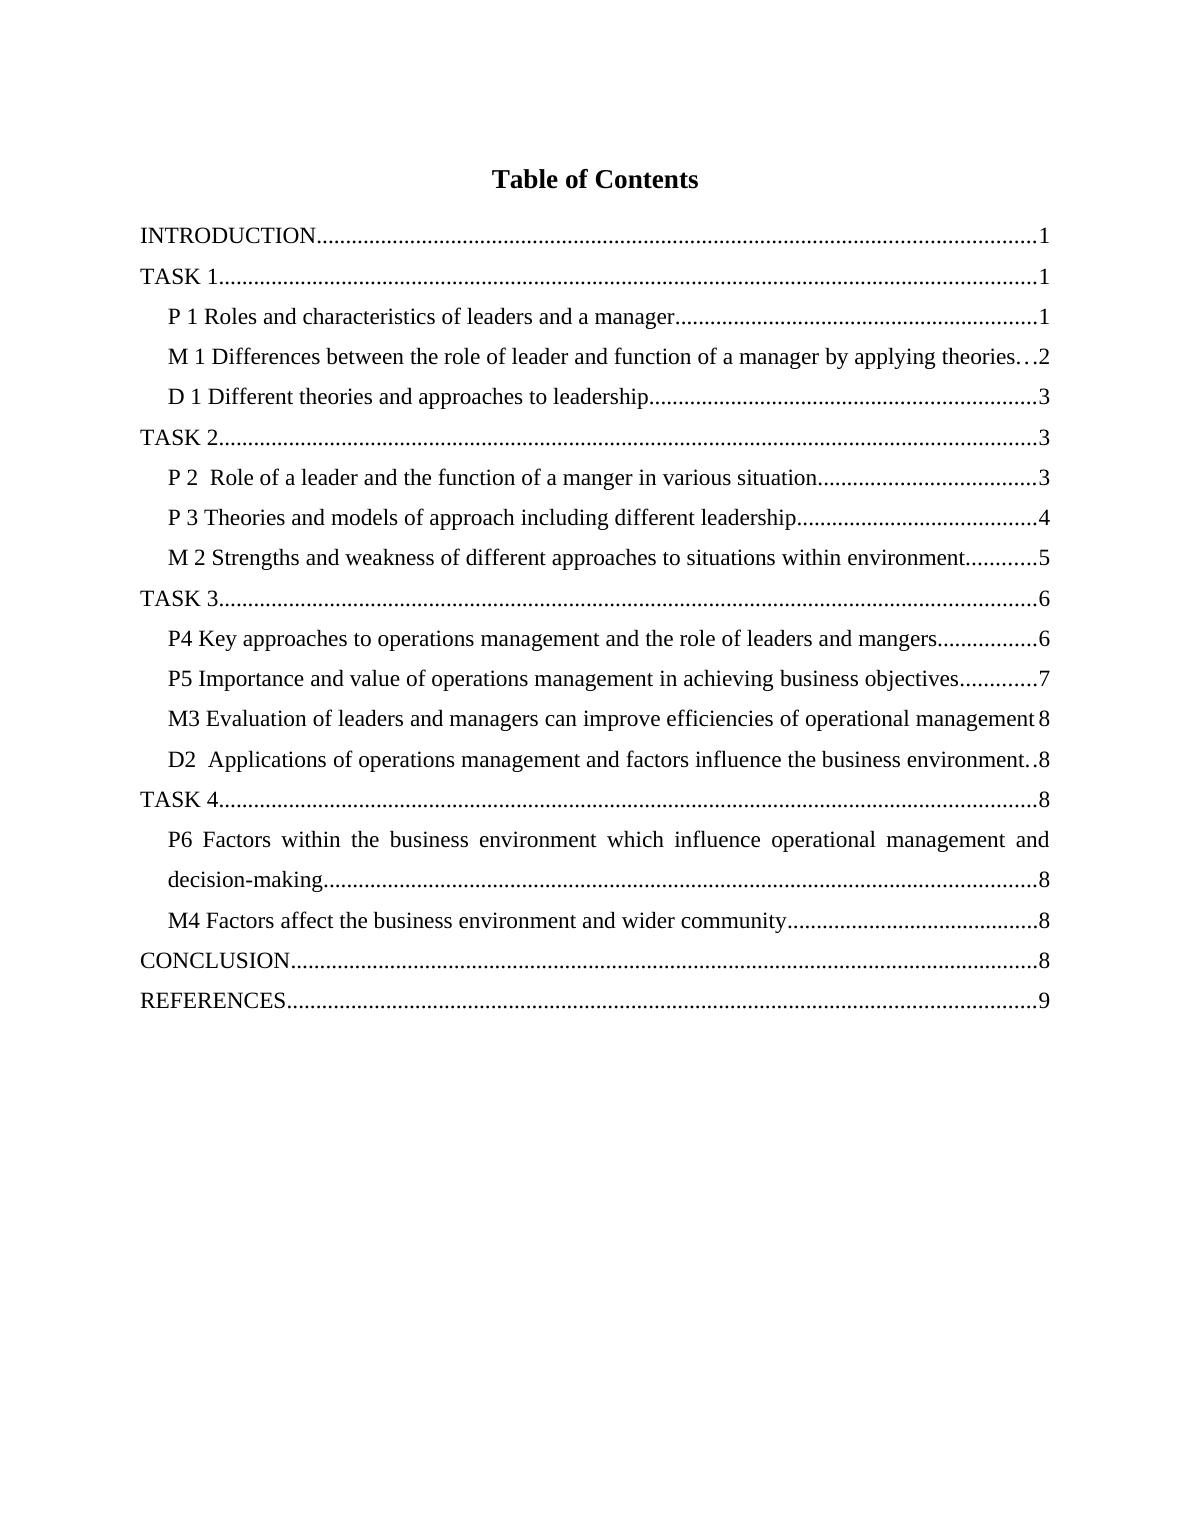 Roles and Characteristics of Leaders in Management and Operations_2